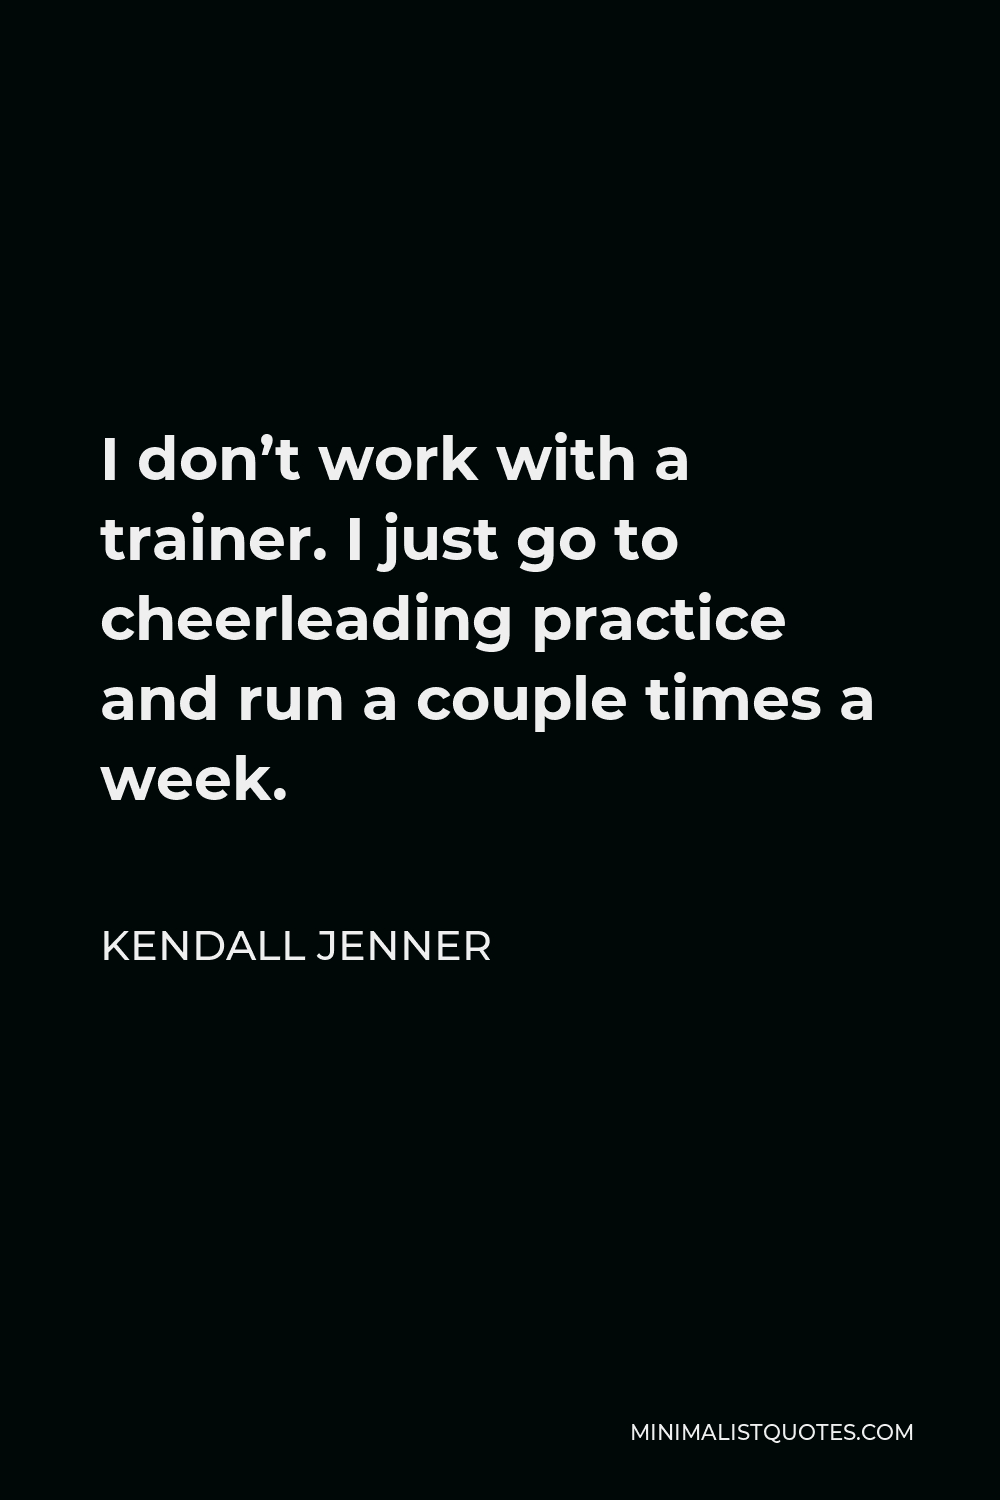 Kendall Jenner Quote - I don’t work with a trainer. I just go to cheerleading practice and run a couple times a week.